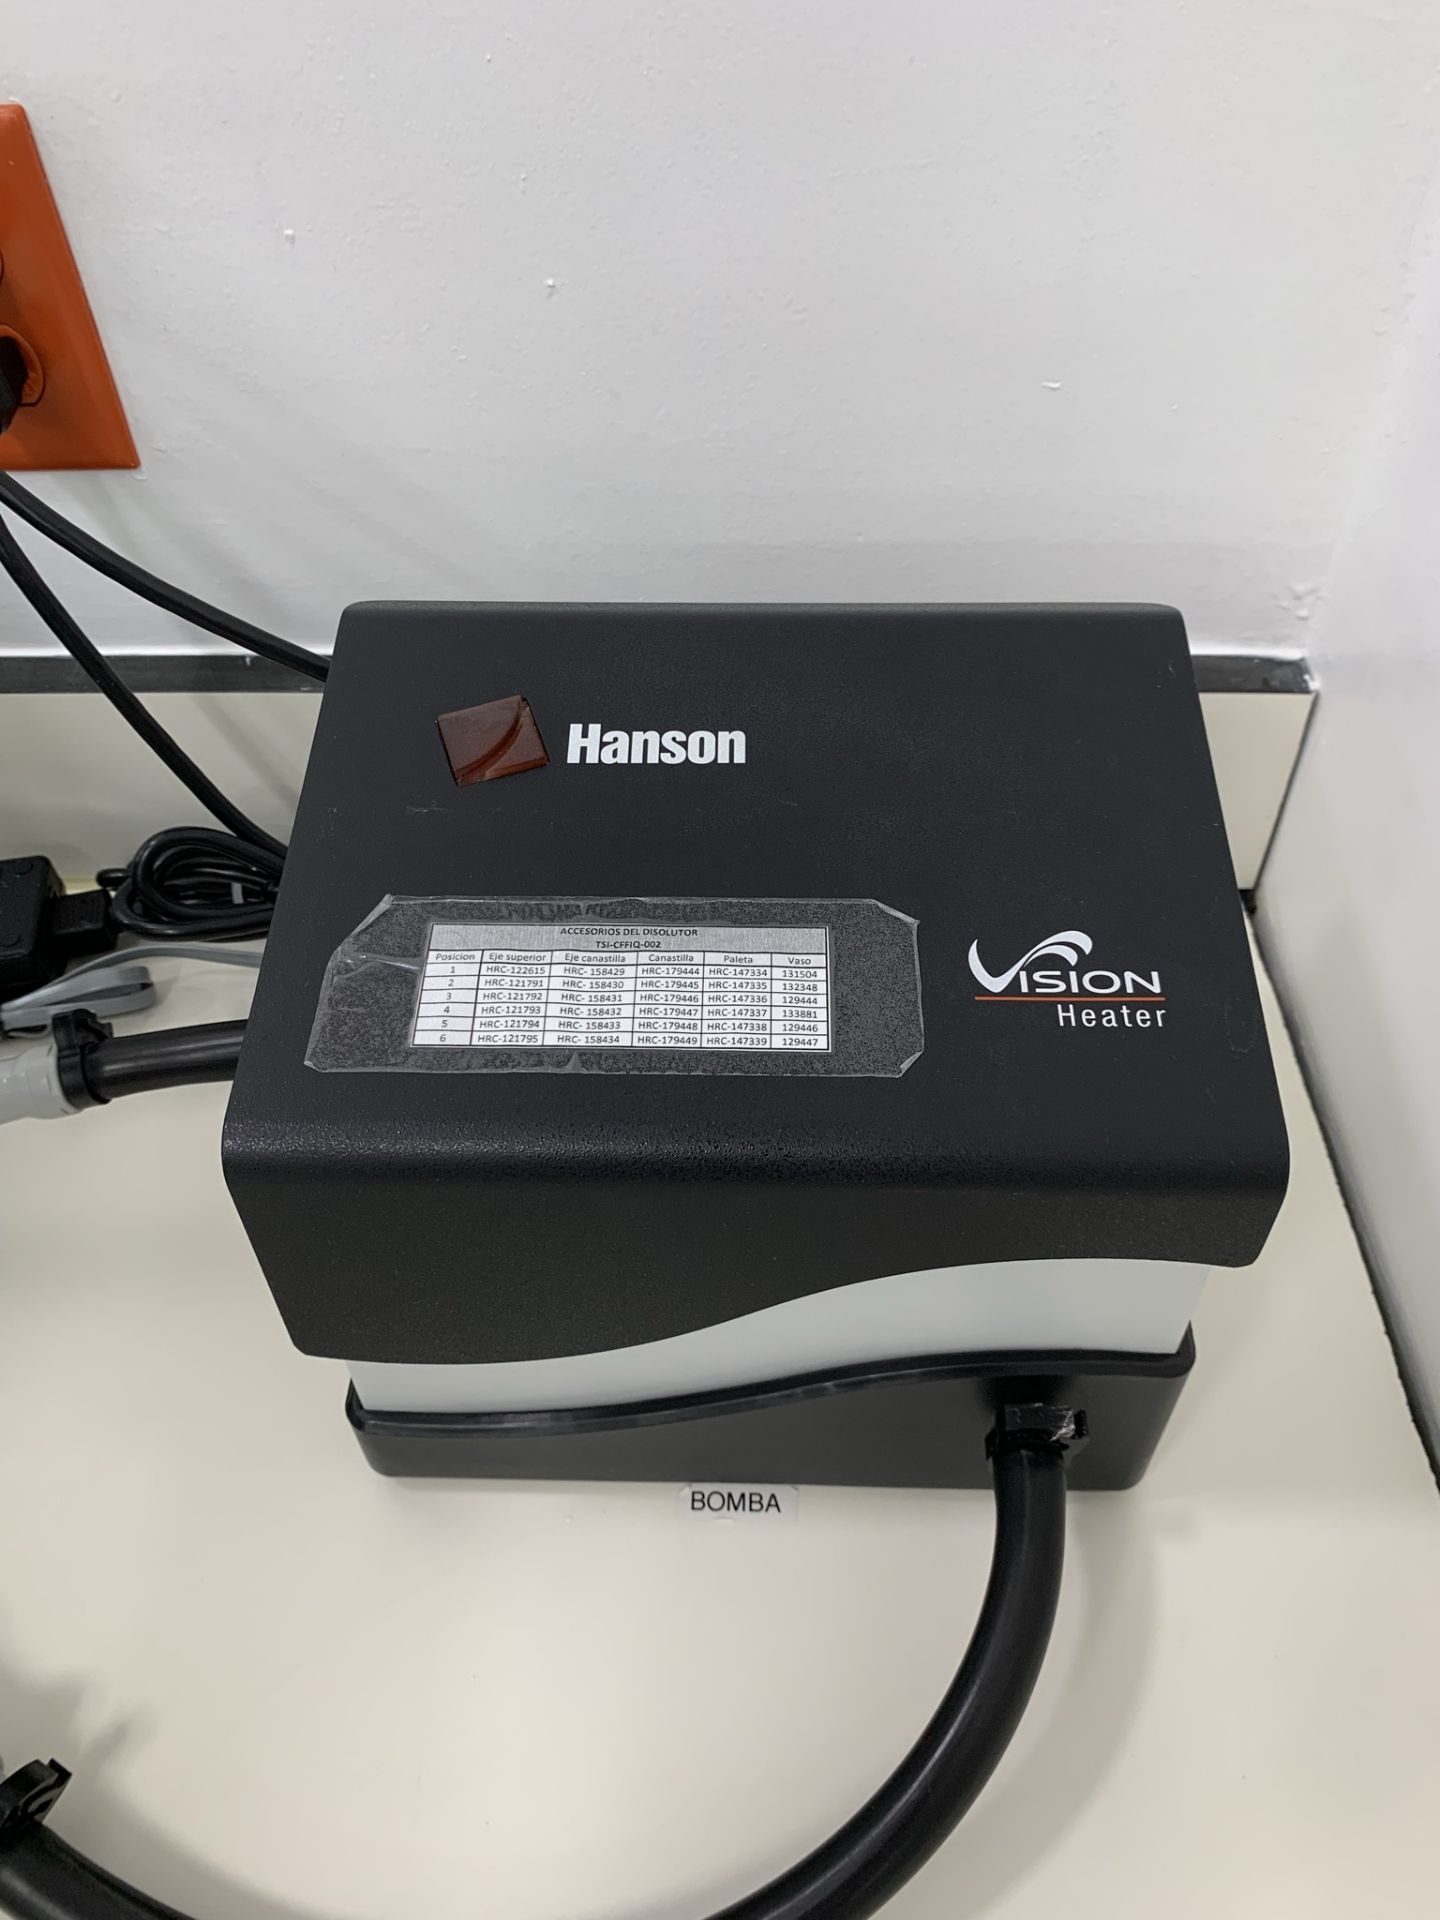 Hanson Research Vision Classic 6 Dissolution Unit complete with accessories, heater and printer - Image 4 of 4